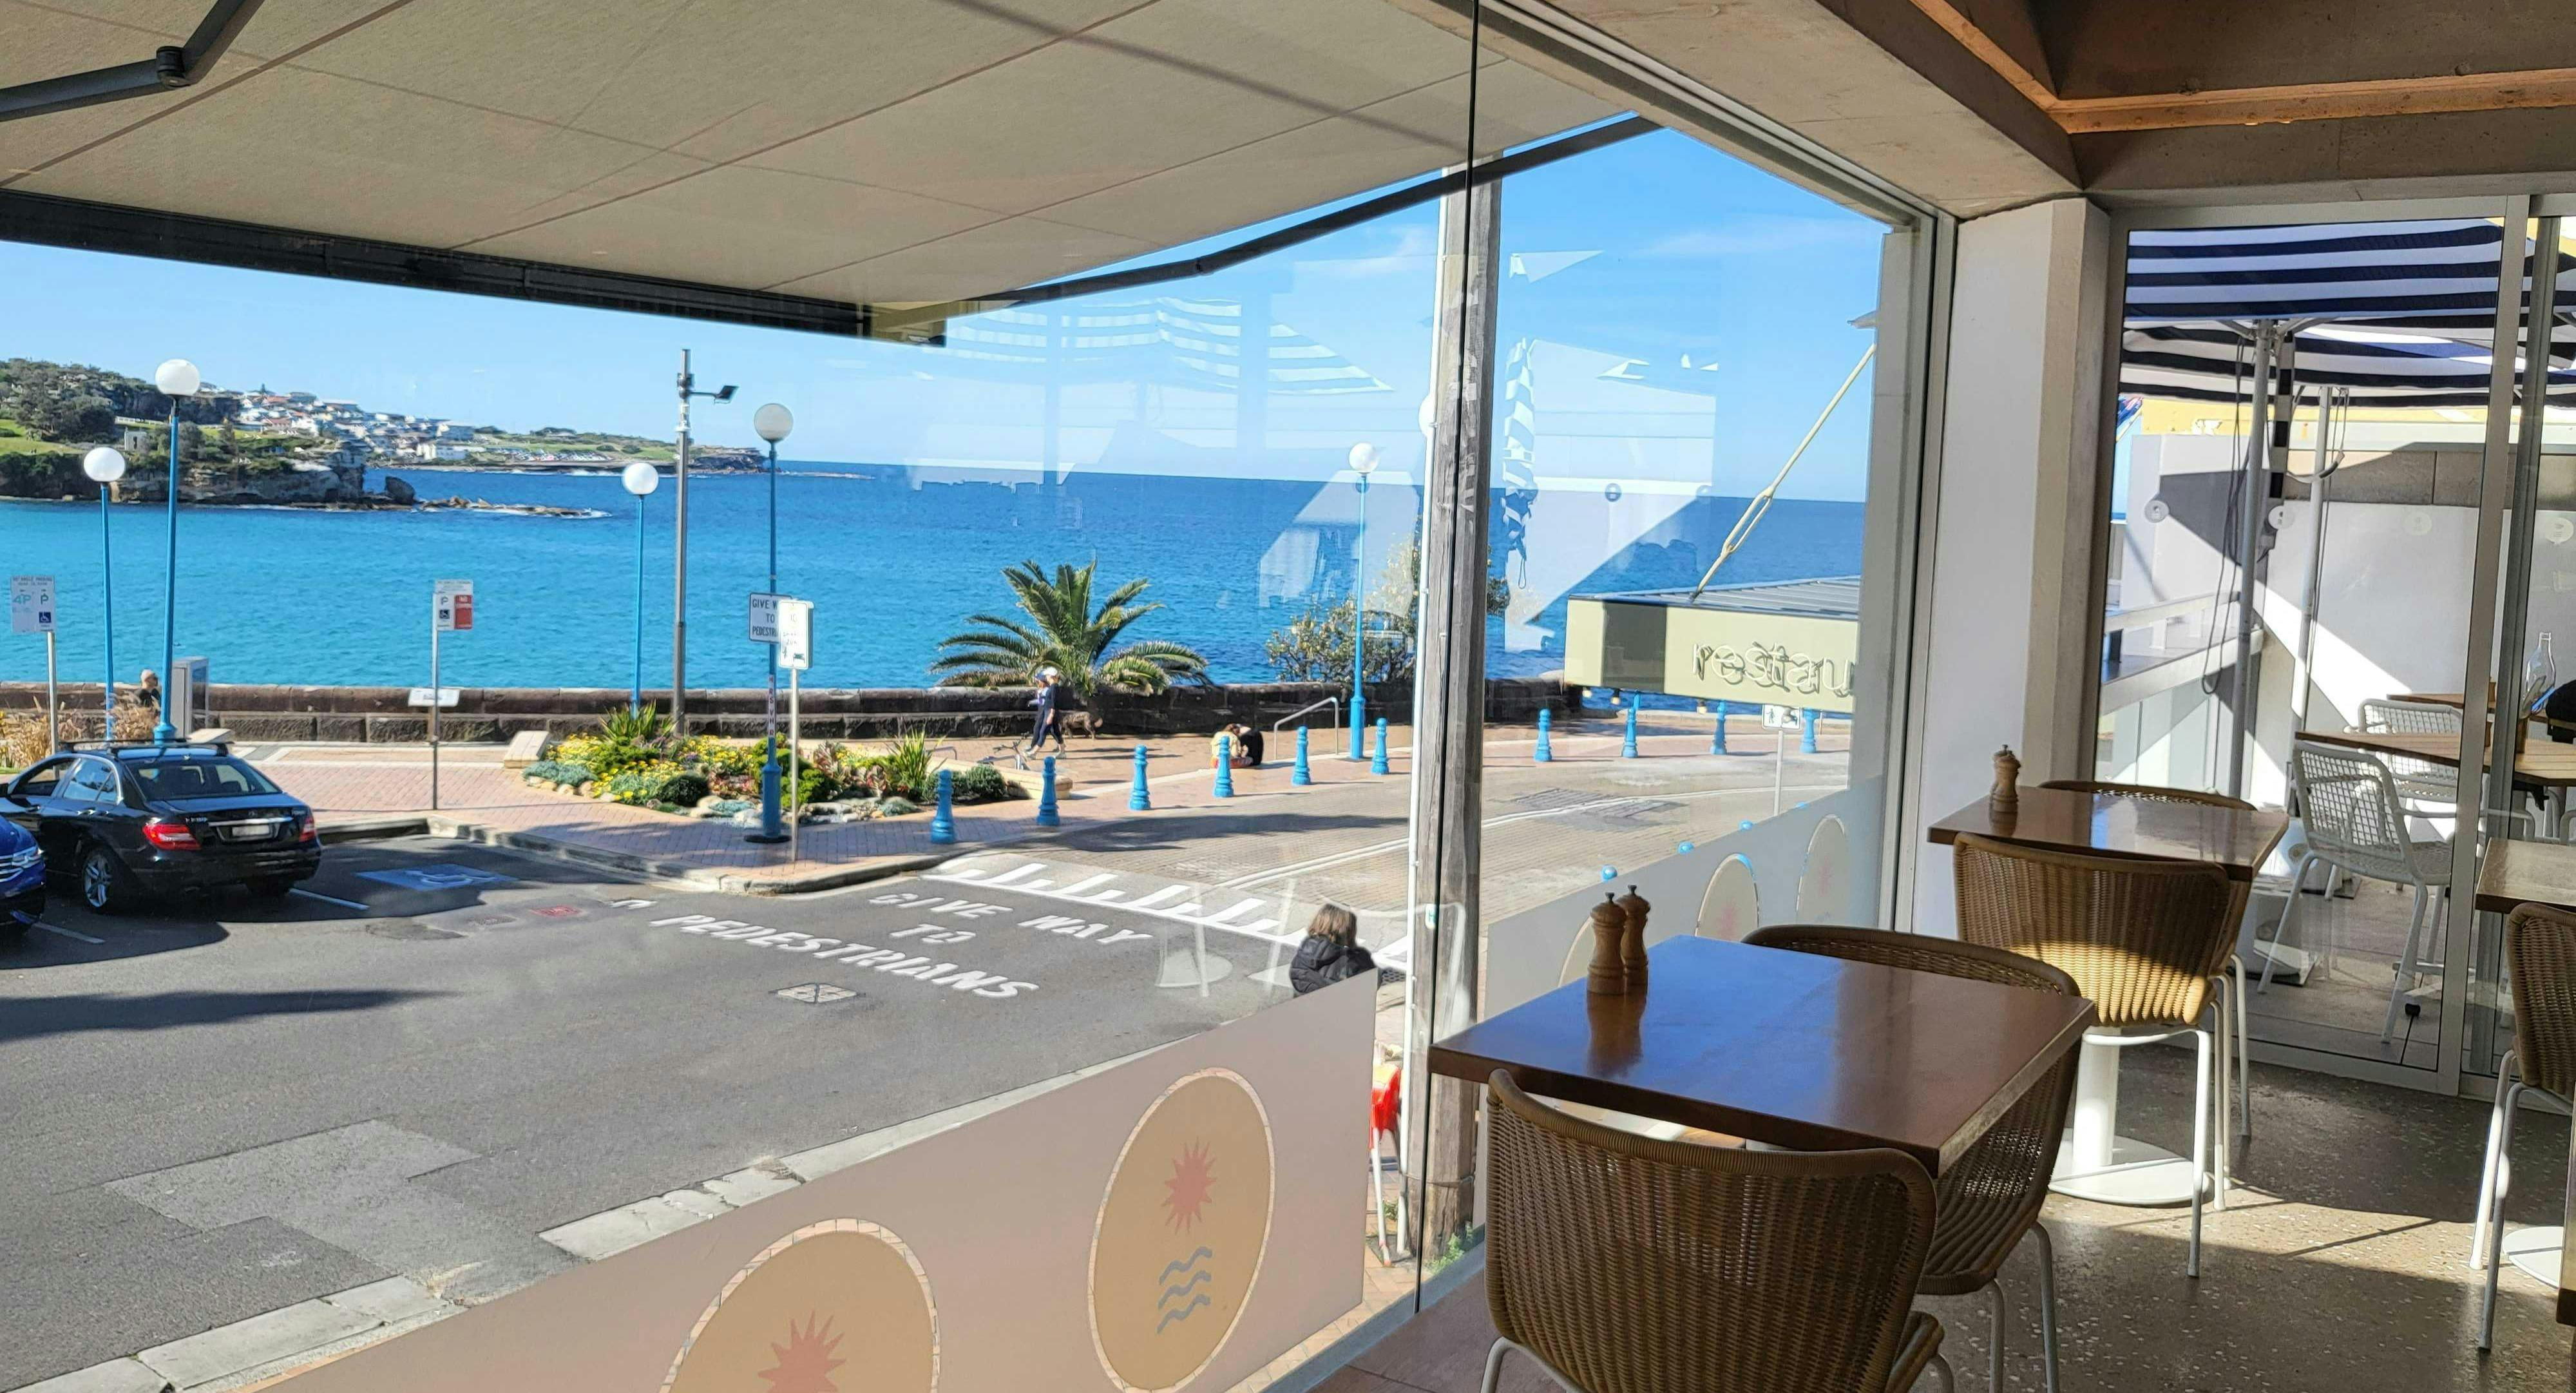 Photo of restaurant Bathers Coogee in Coogee, Sydney